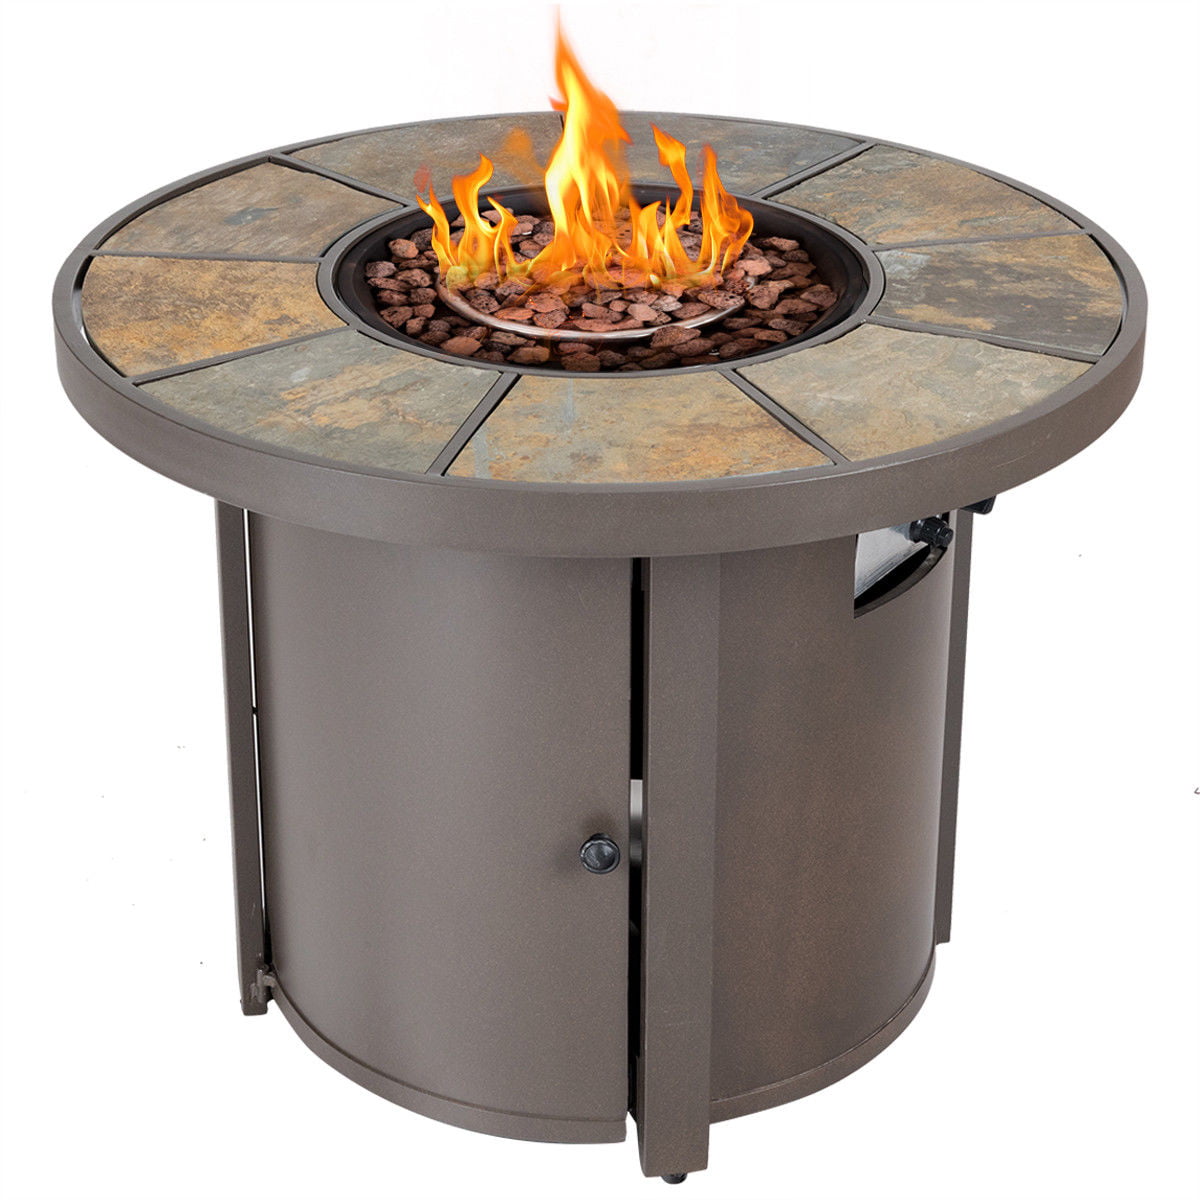 Costway 32'' Round Outdoor Propane Gas Fire Pit Table 30,000 BTUs Patio